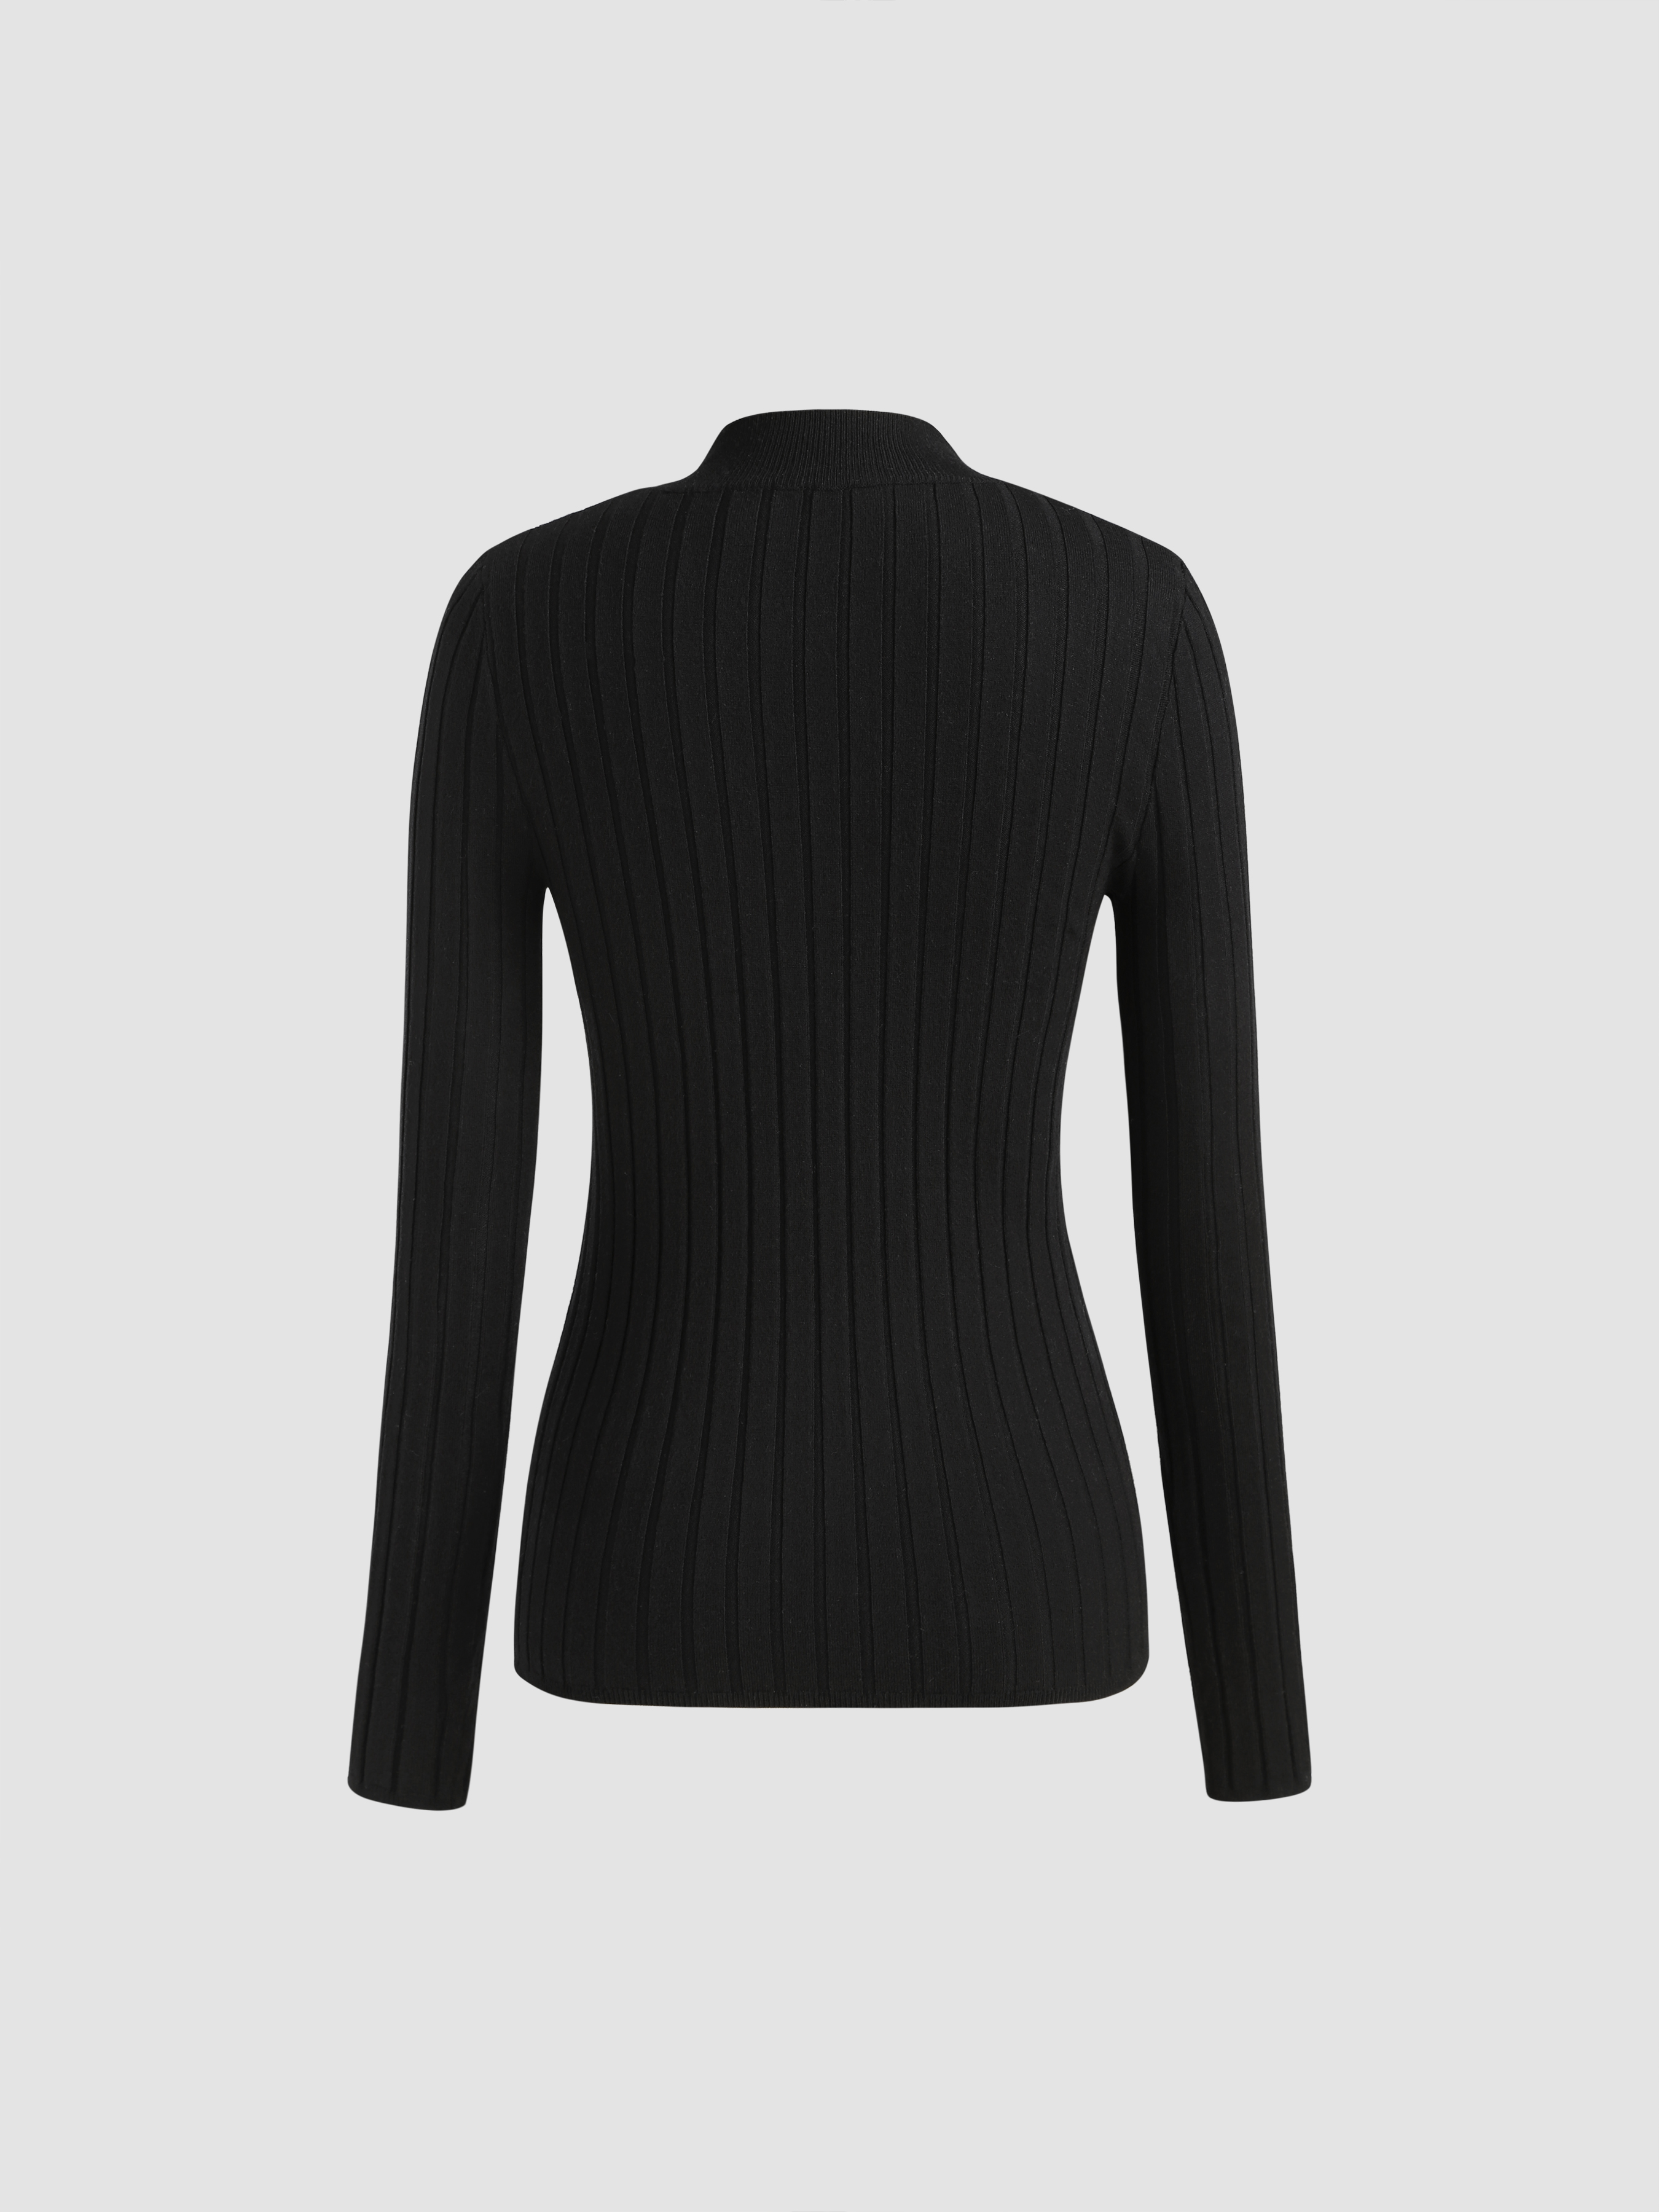 High Neck Rib Knit Sweater For Daily Casual Work